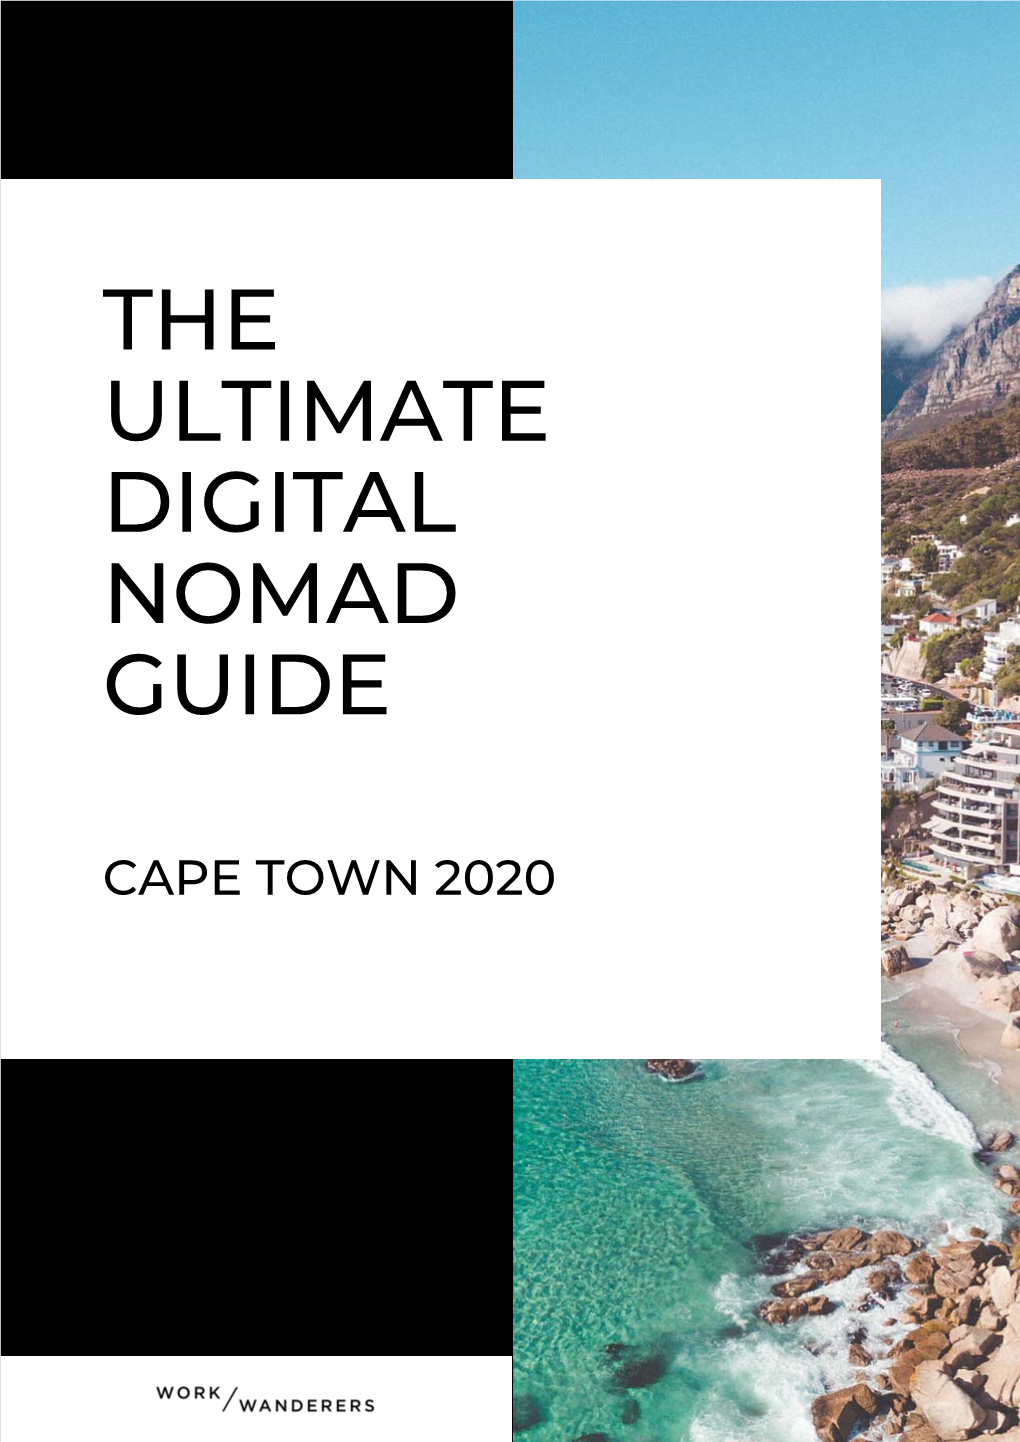 The Ultimate Digital Nomad Guide